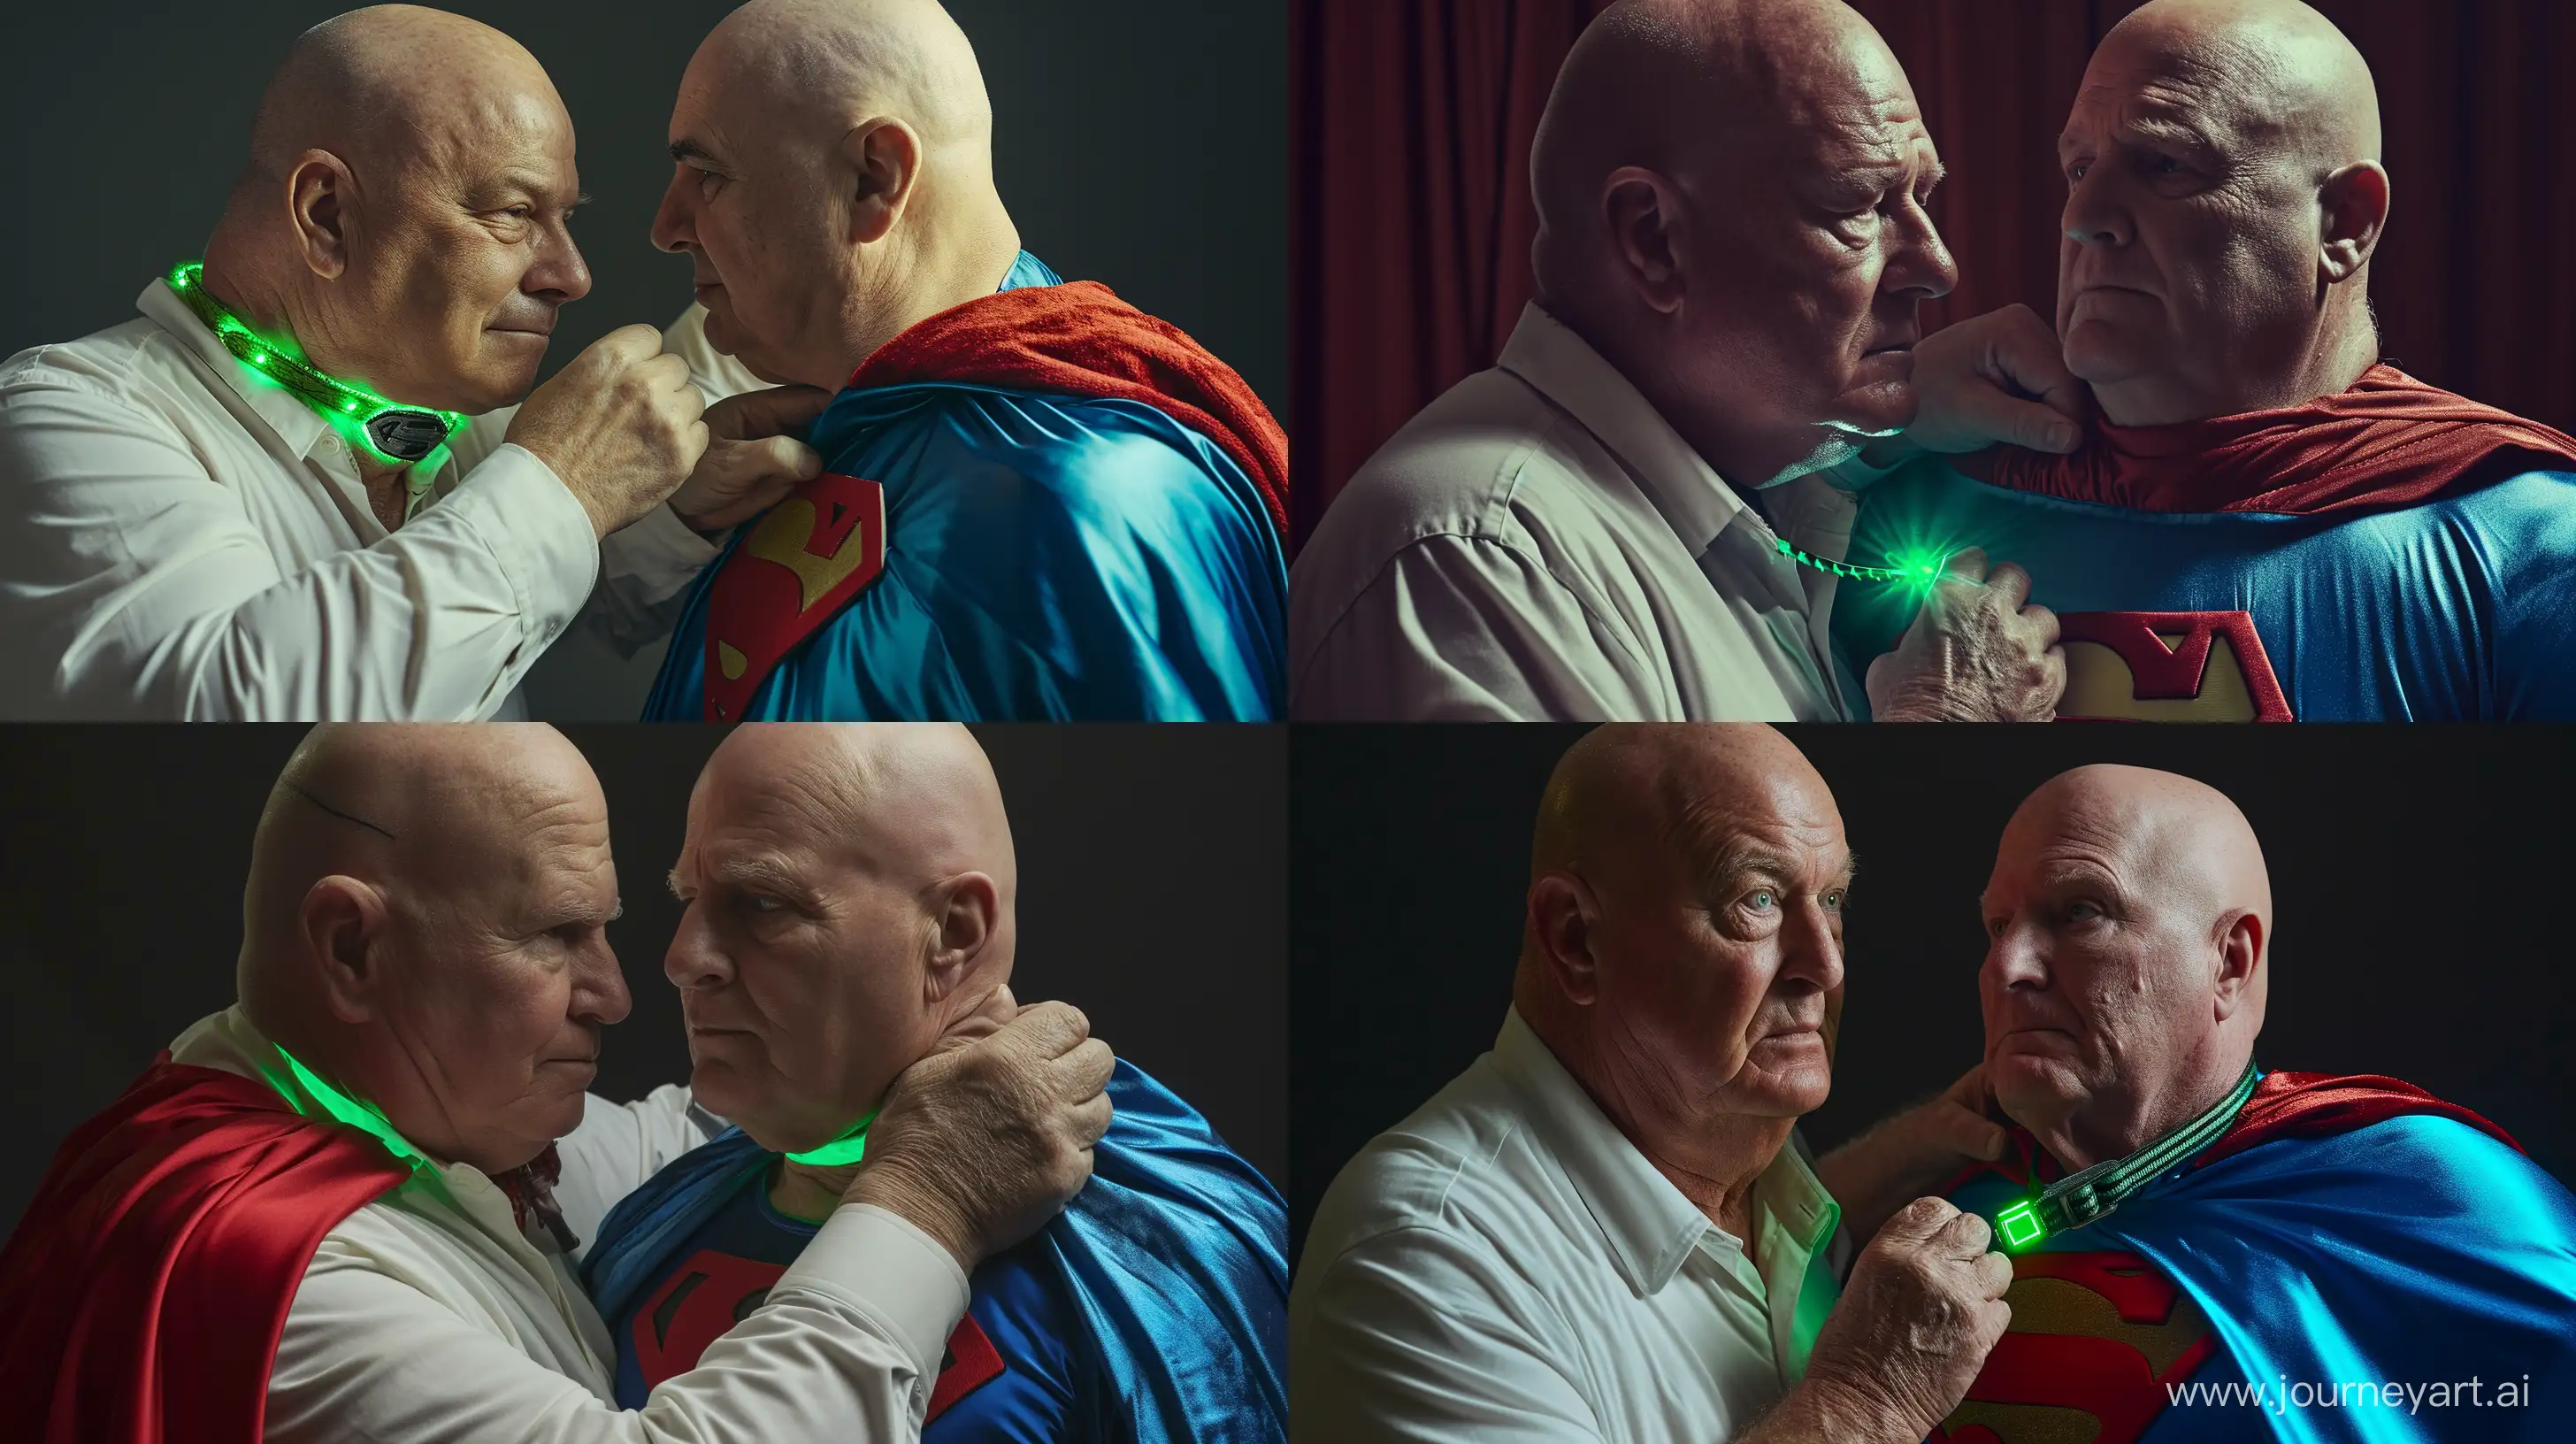 Elderly-Men-Engage-in-Playful-Costume-Activity-with-Glowing-Dog-Collar